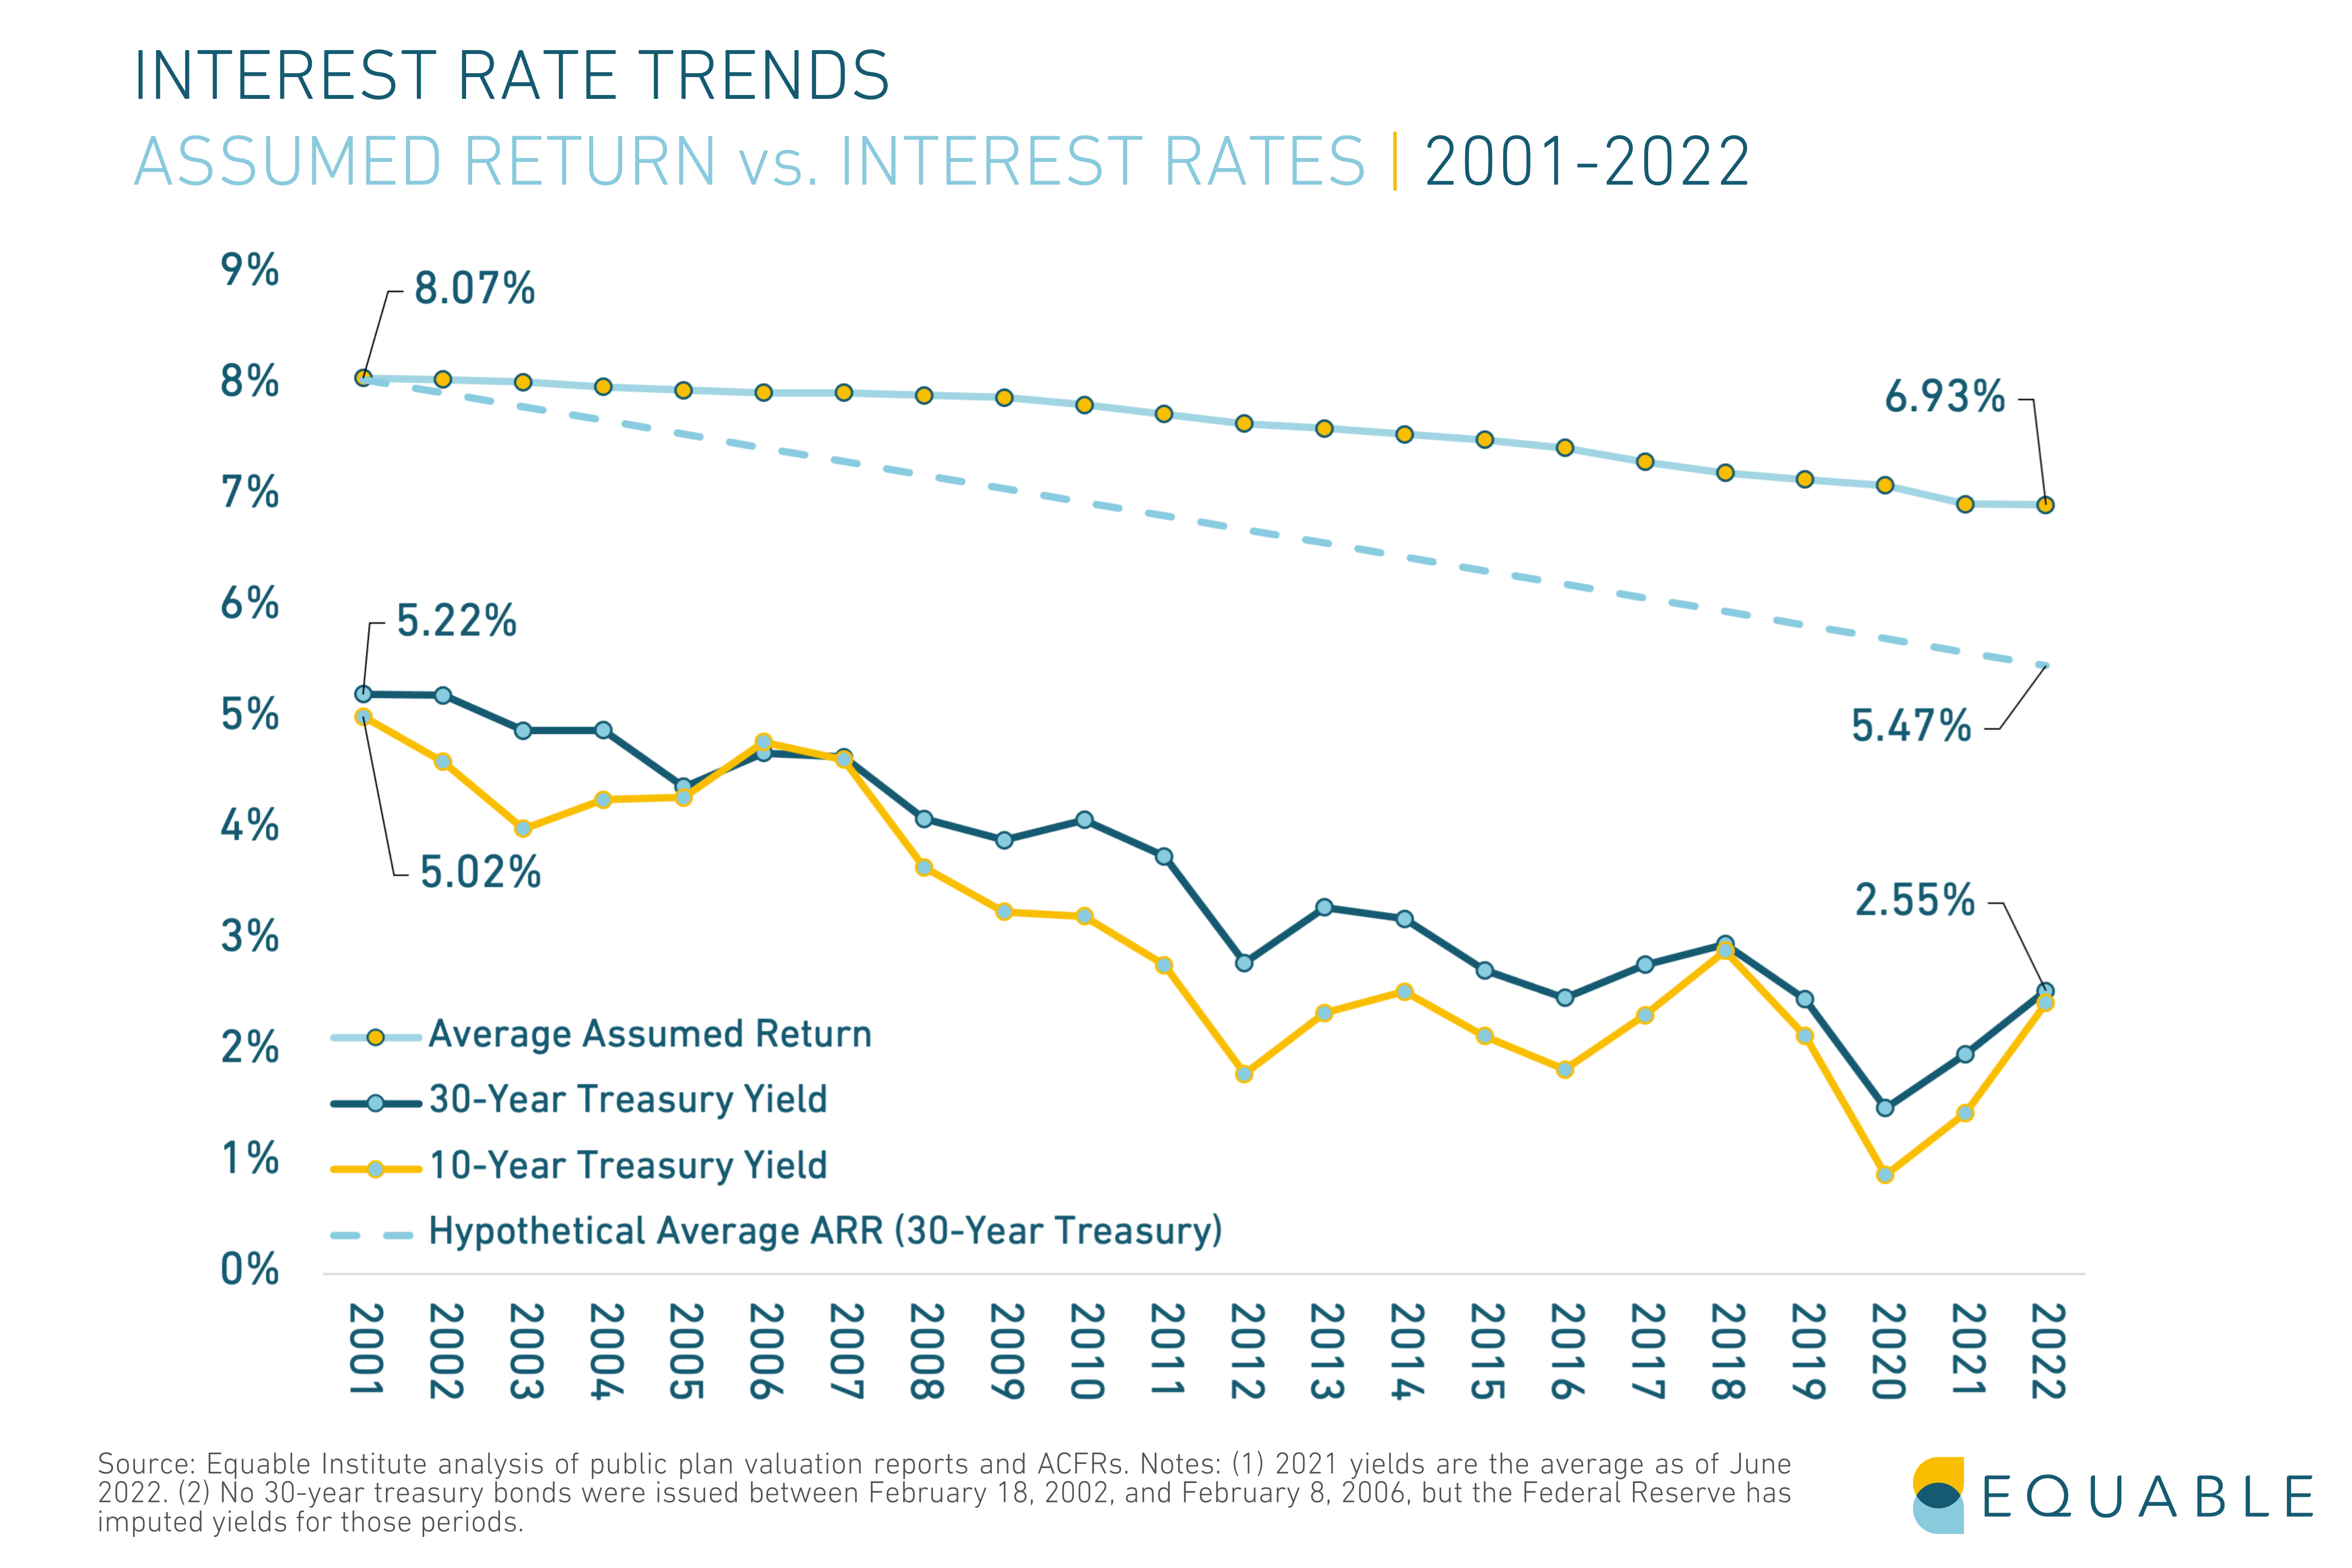 2022 Pension Funding Trends: Assumed Rates of Return are Not Keeping up with Interest Rates